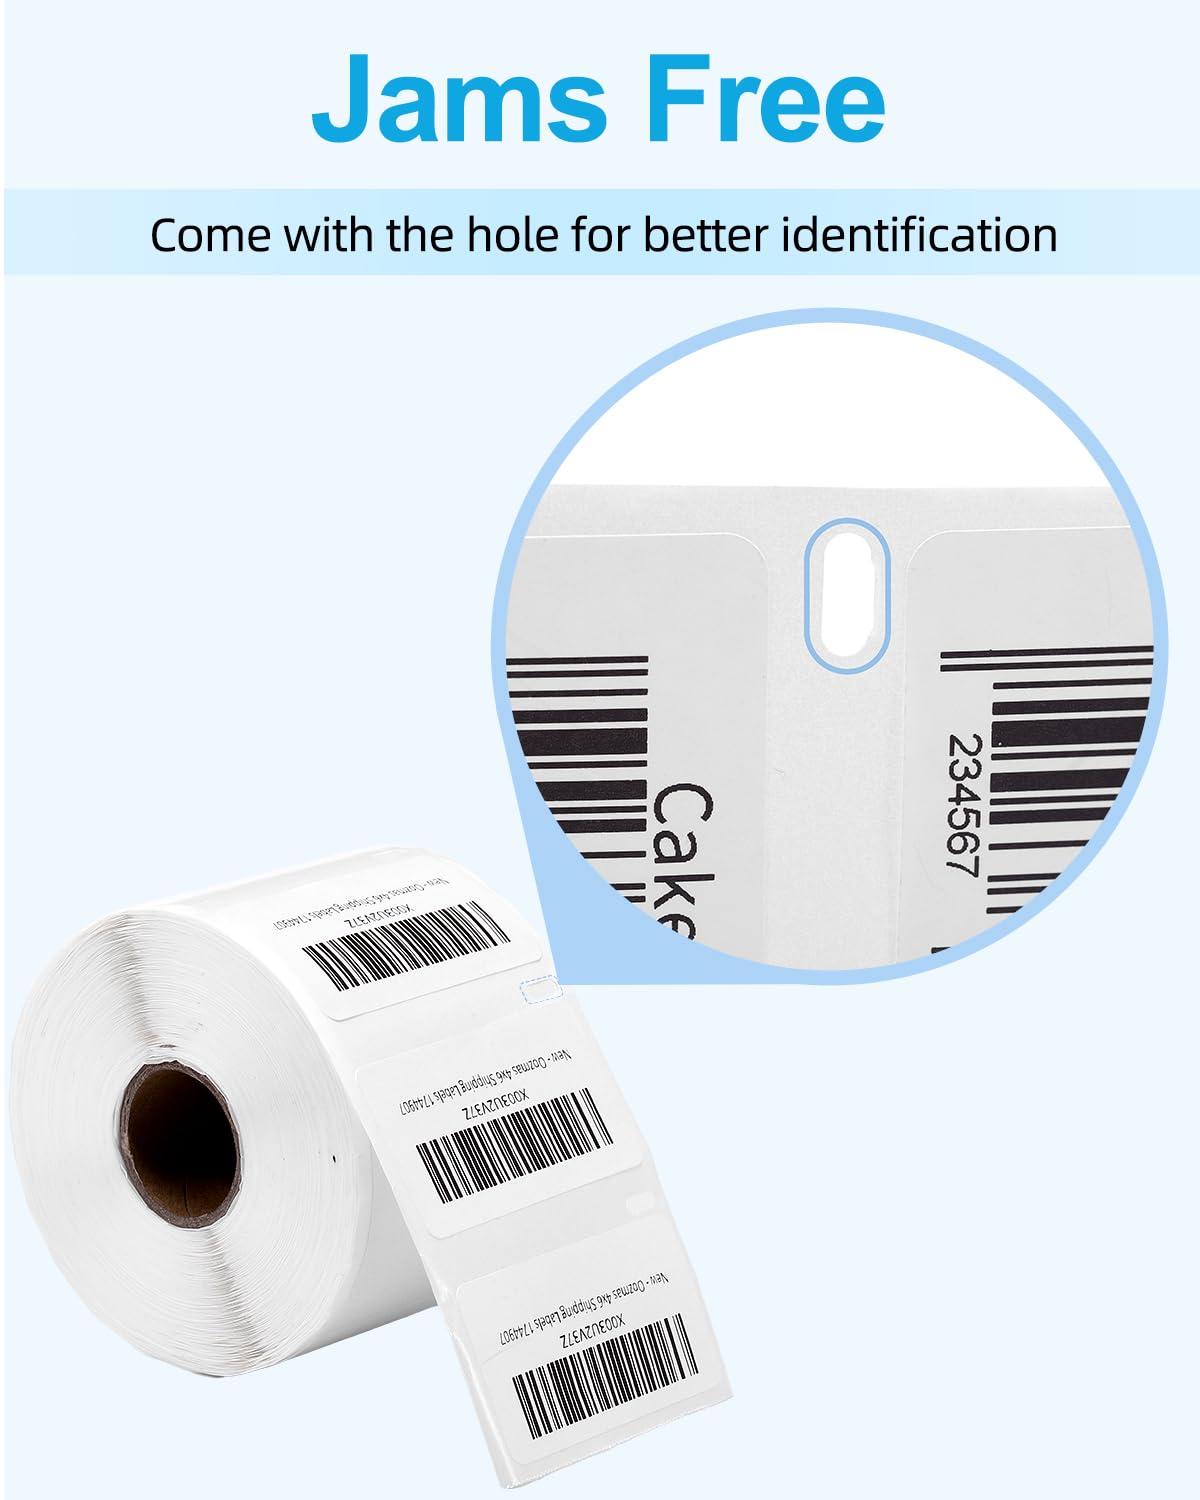 Replace Dymo Labelwriter 450 Turbo Labels 30334 Direct Thermal Labels 2.25" X 1.25”Compatible with DYMO 4XL, Rollo, Zebra Printer 2-1/4" x 1-1/4" LW Address Paper 1000 Labels Per Roll, 8 Rolls